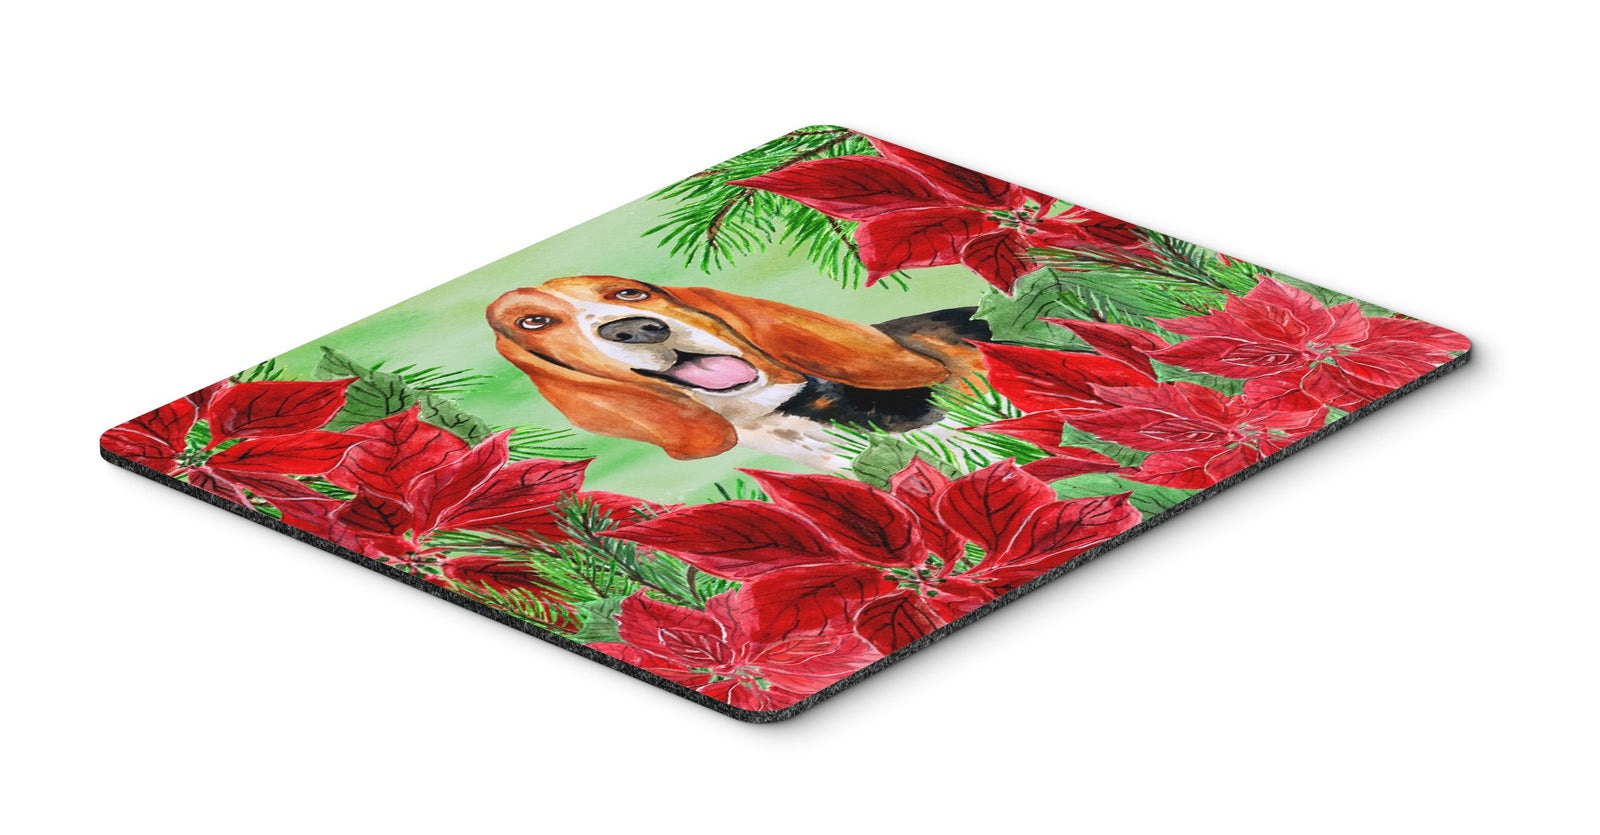 Basset Hound Poinsettas Mouse Pad, Hot Pad or Trivet CK1352MP by Caroline's Treasures